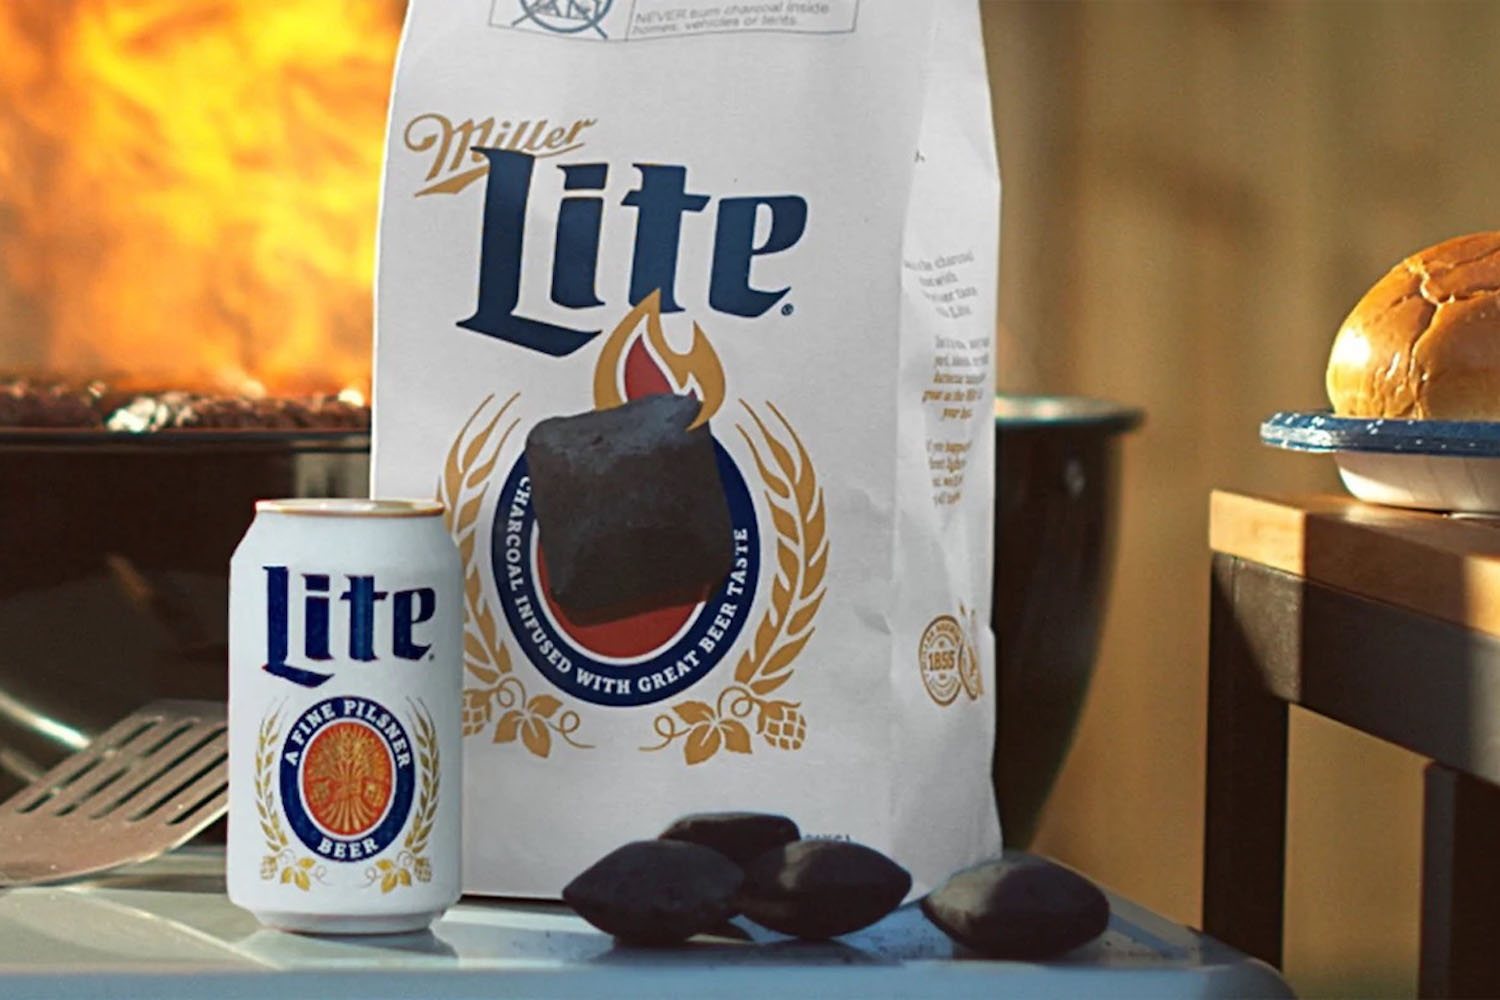 a staged product shot of of a can of Miller Lite and a bag of Miller Lite Beercoal in front of a grill